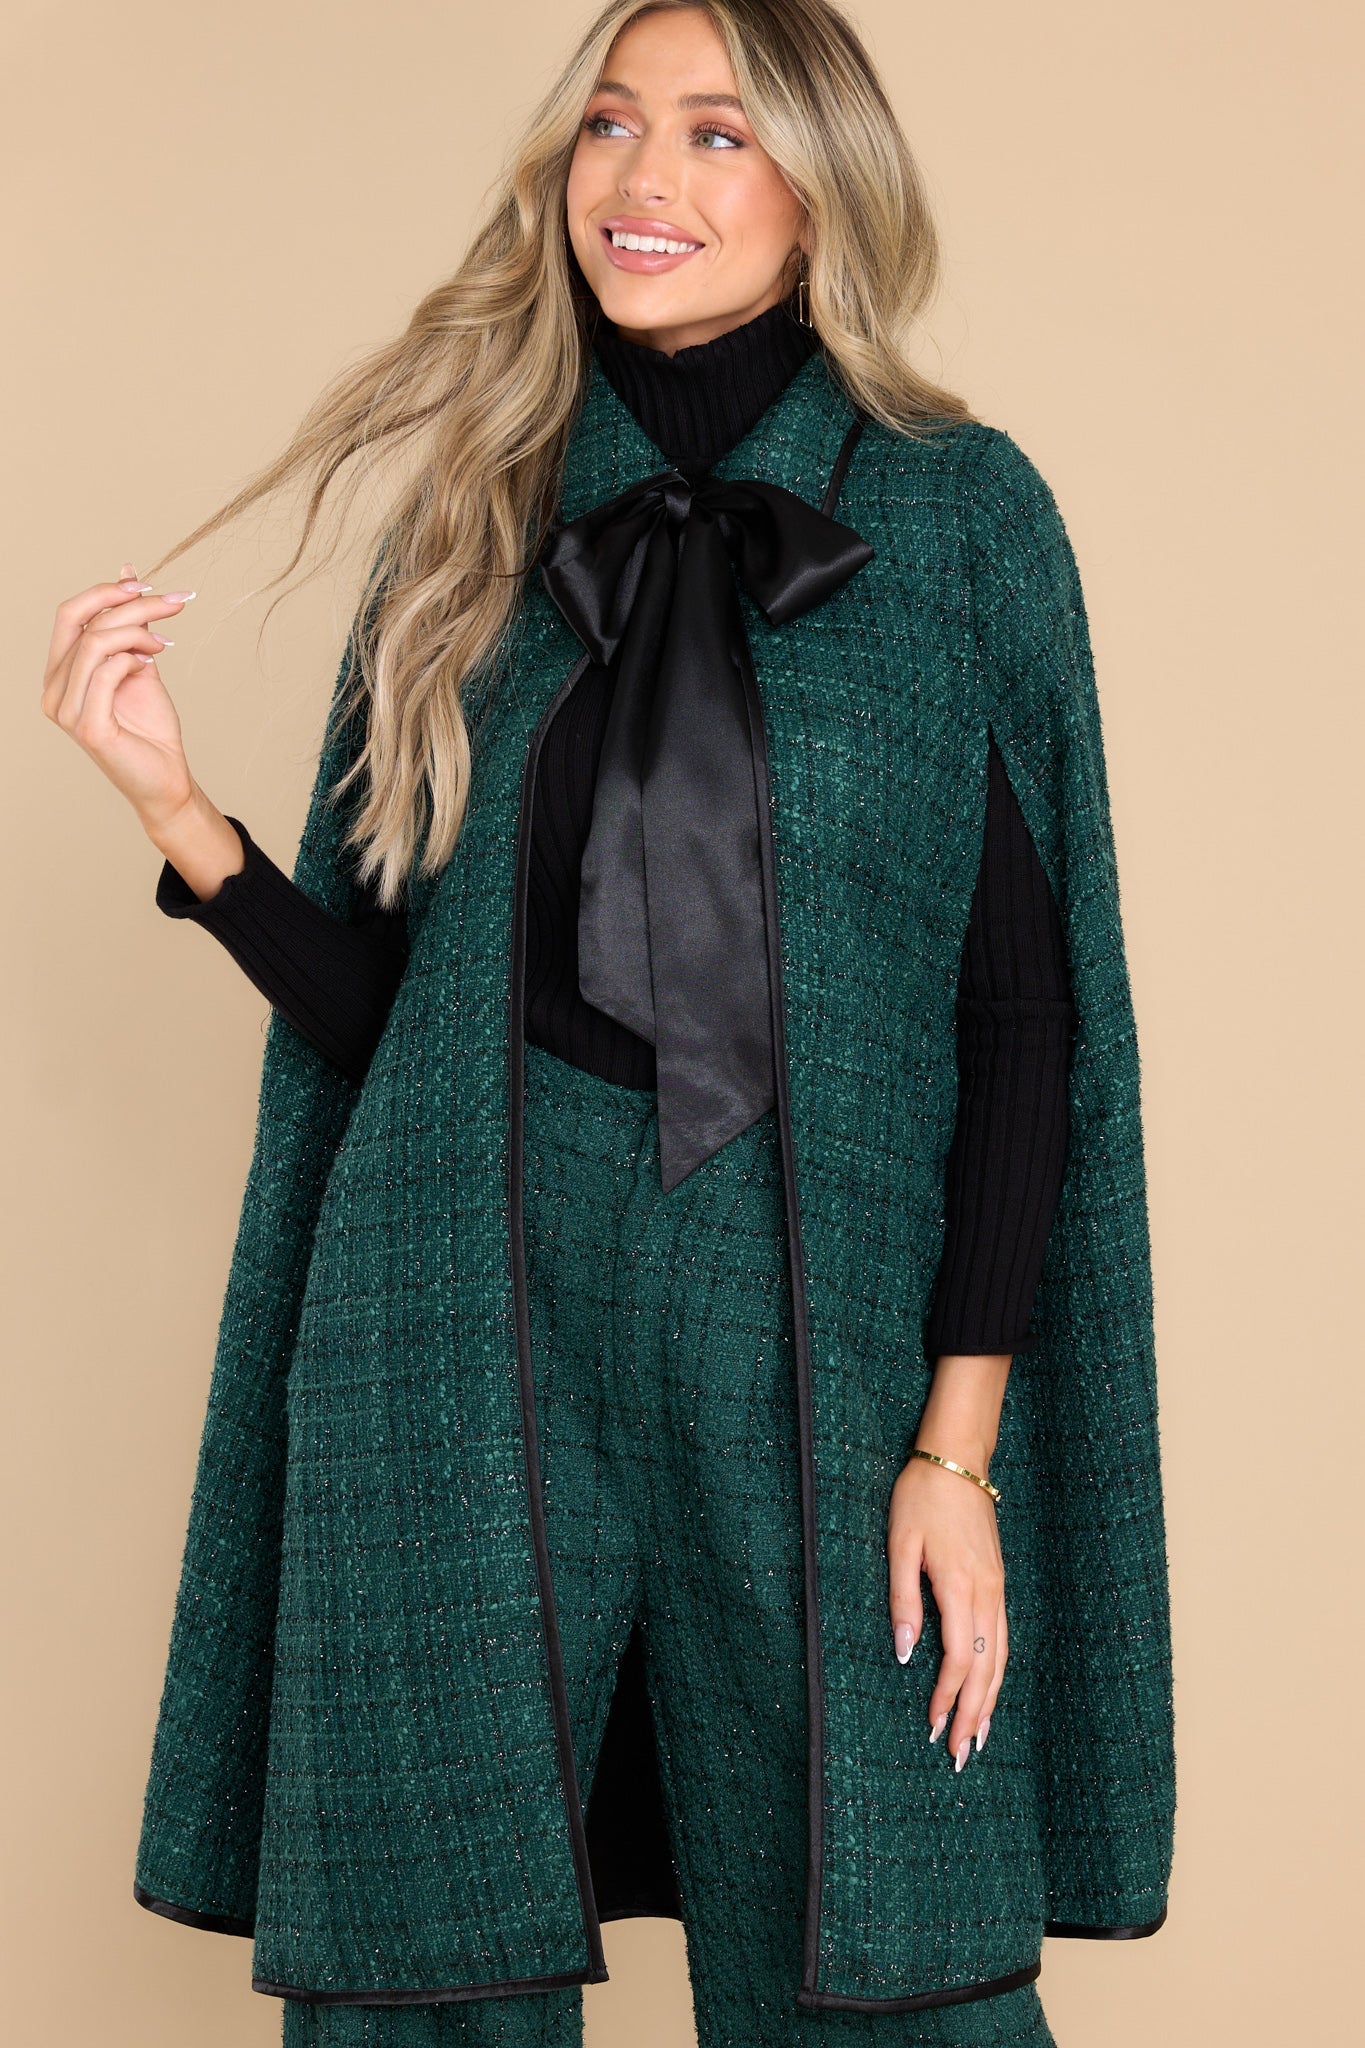 Gorgeous Dark Green And Black Cape Poncho - All Outerwear | Red Dress